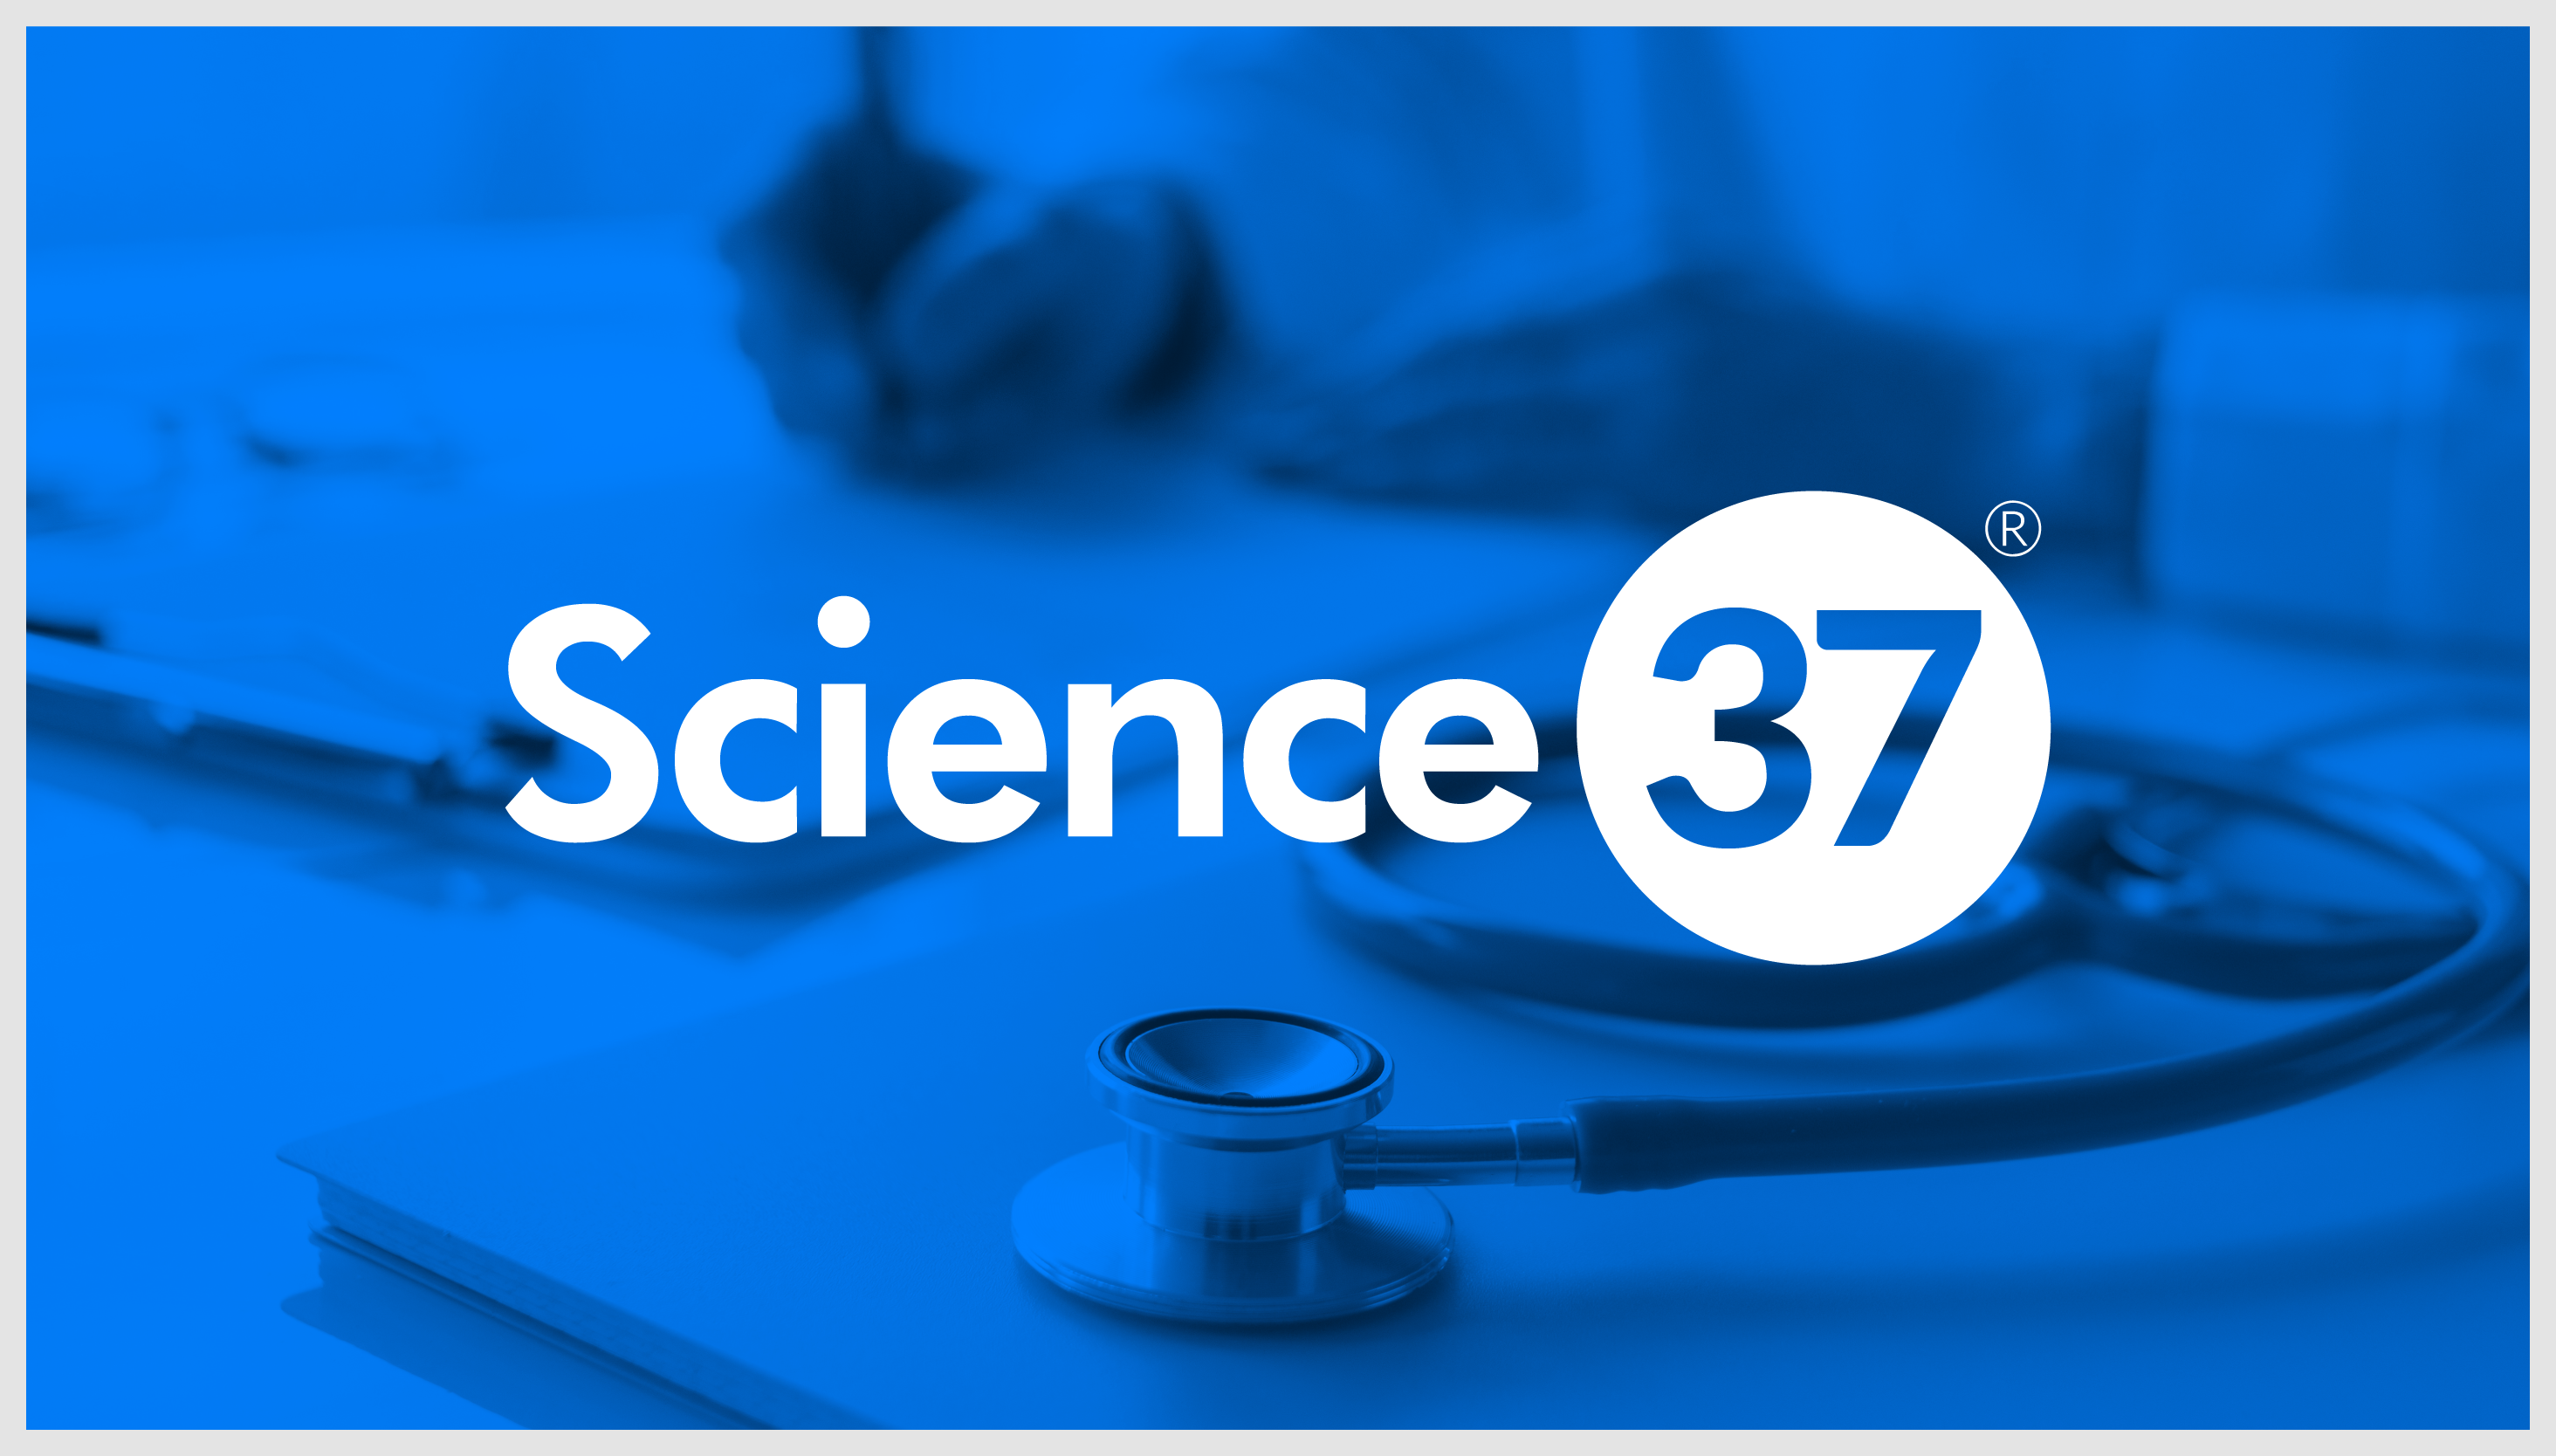 Science37 logo overlapping a photograph of a stethoscope